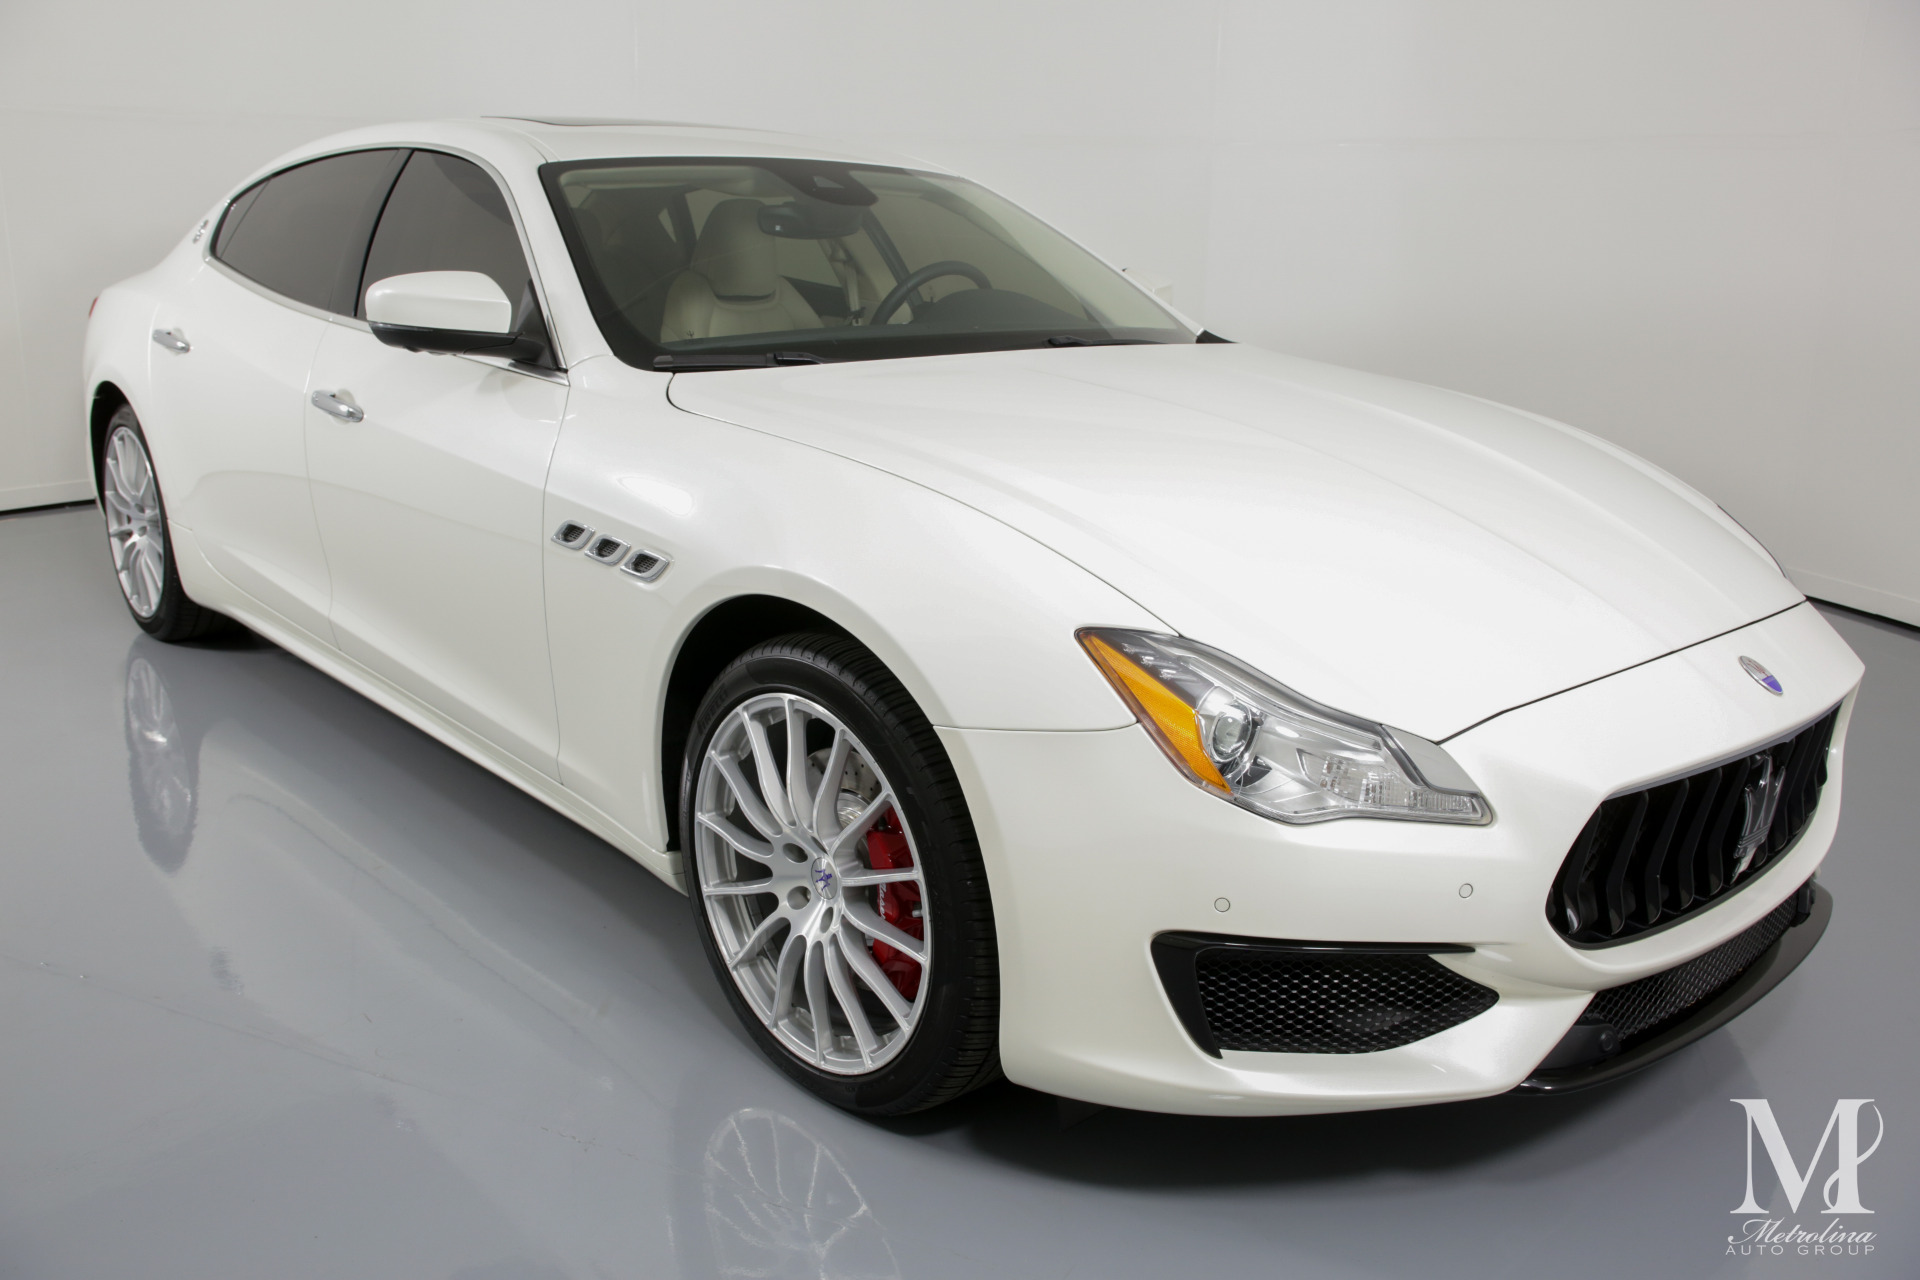 Used 2017 Maserati Quattroporte S GranSport for sale Sold at Metrolina Auto Group in Charlotte NC 28217 - 2